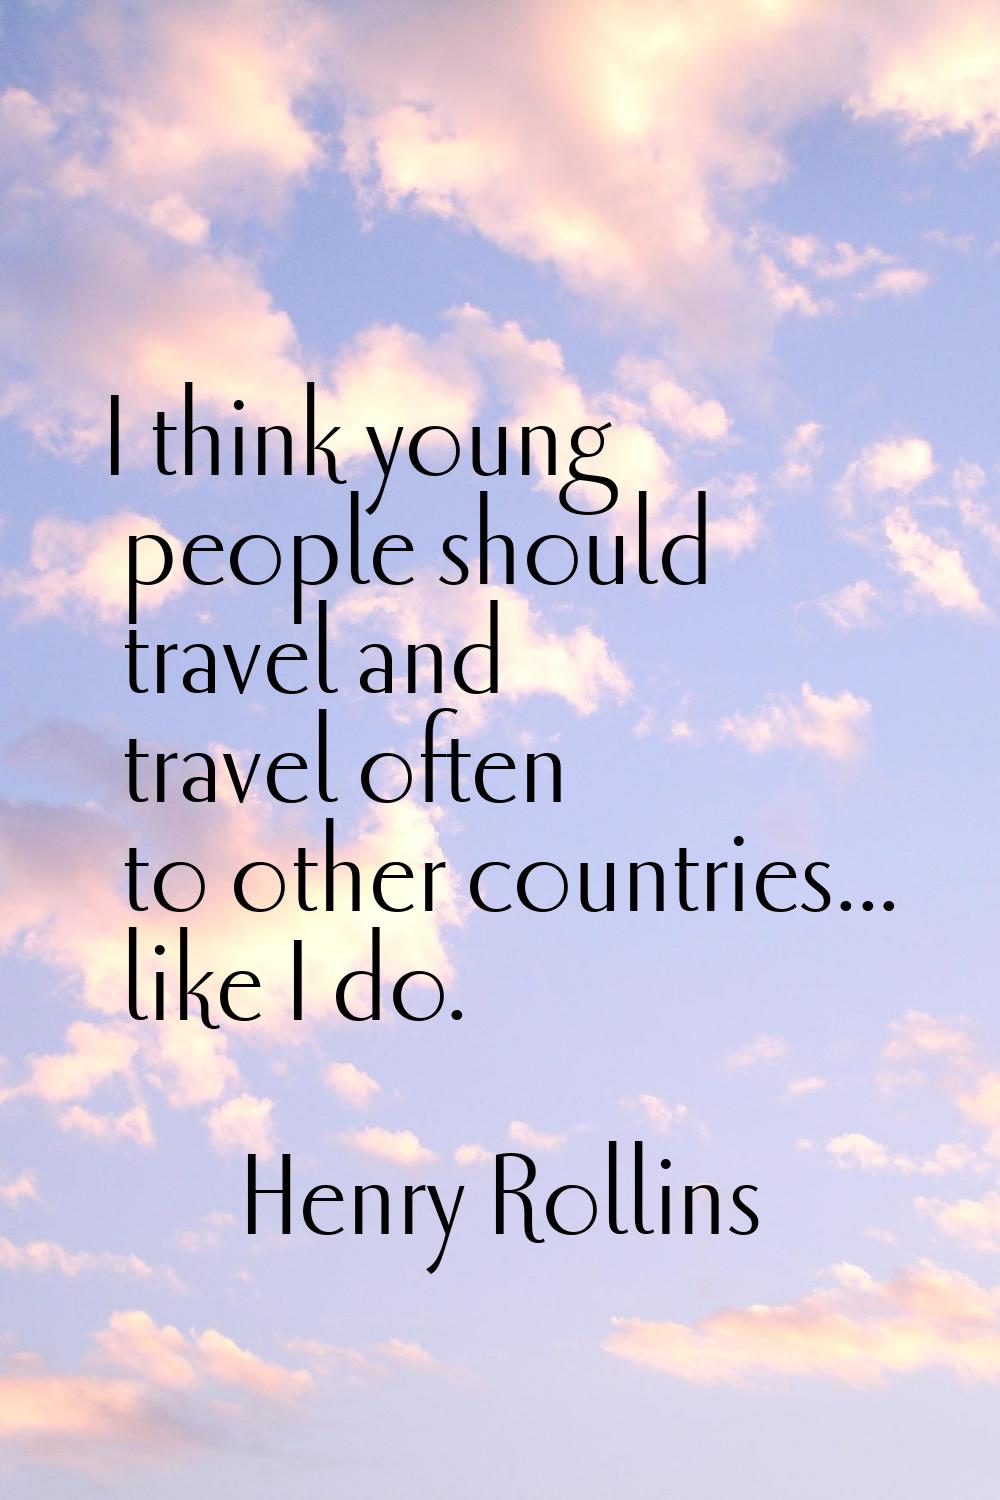 I think young people should travel and travel often to other countries... like I do.